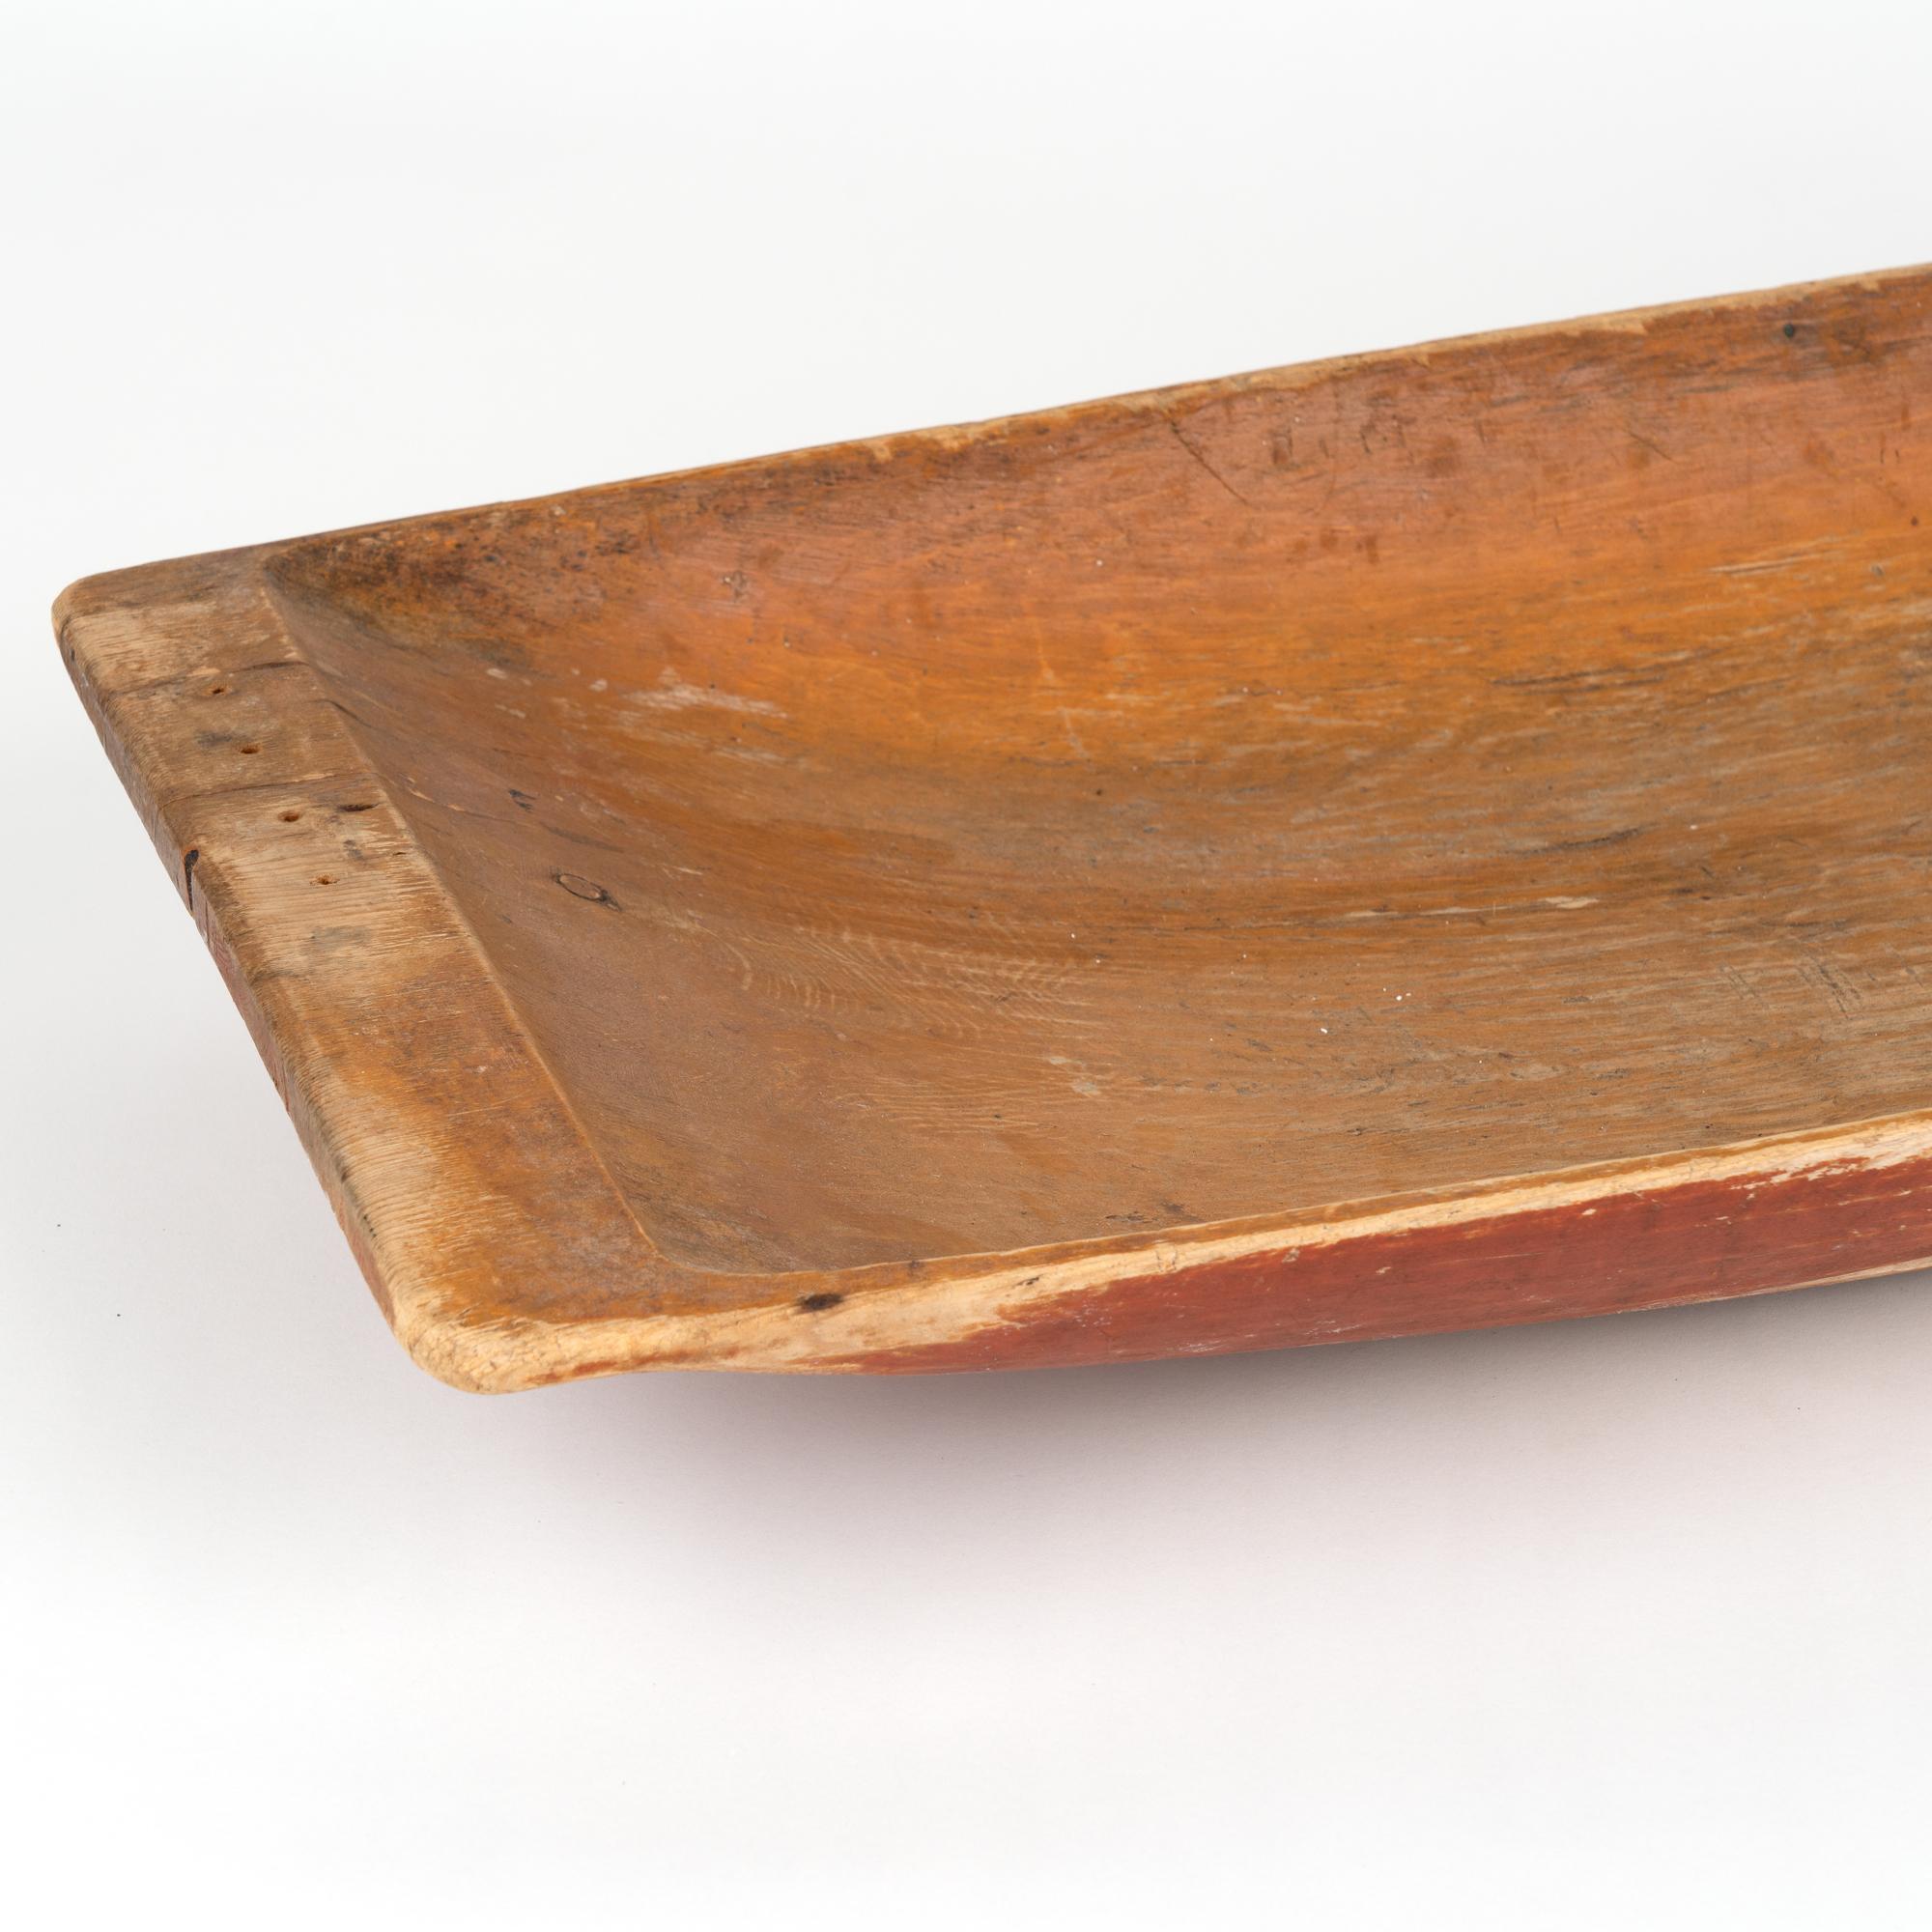 Original Red Painted Swedish Pine Wooden Bowl, circa 1880 For Sale 1